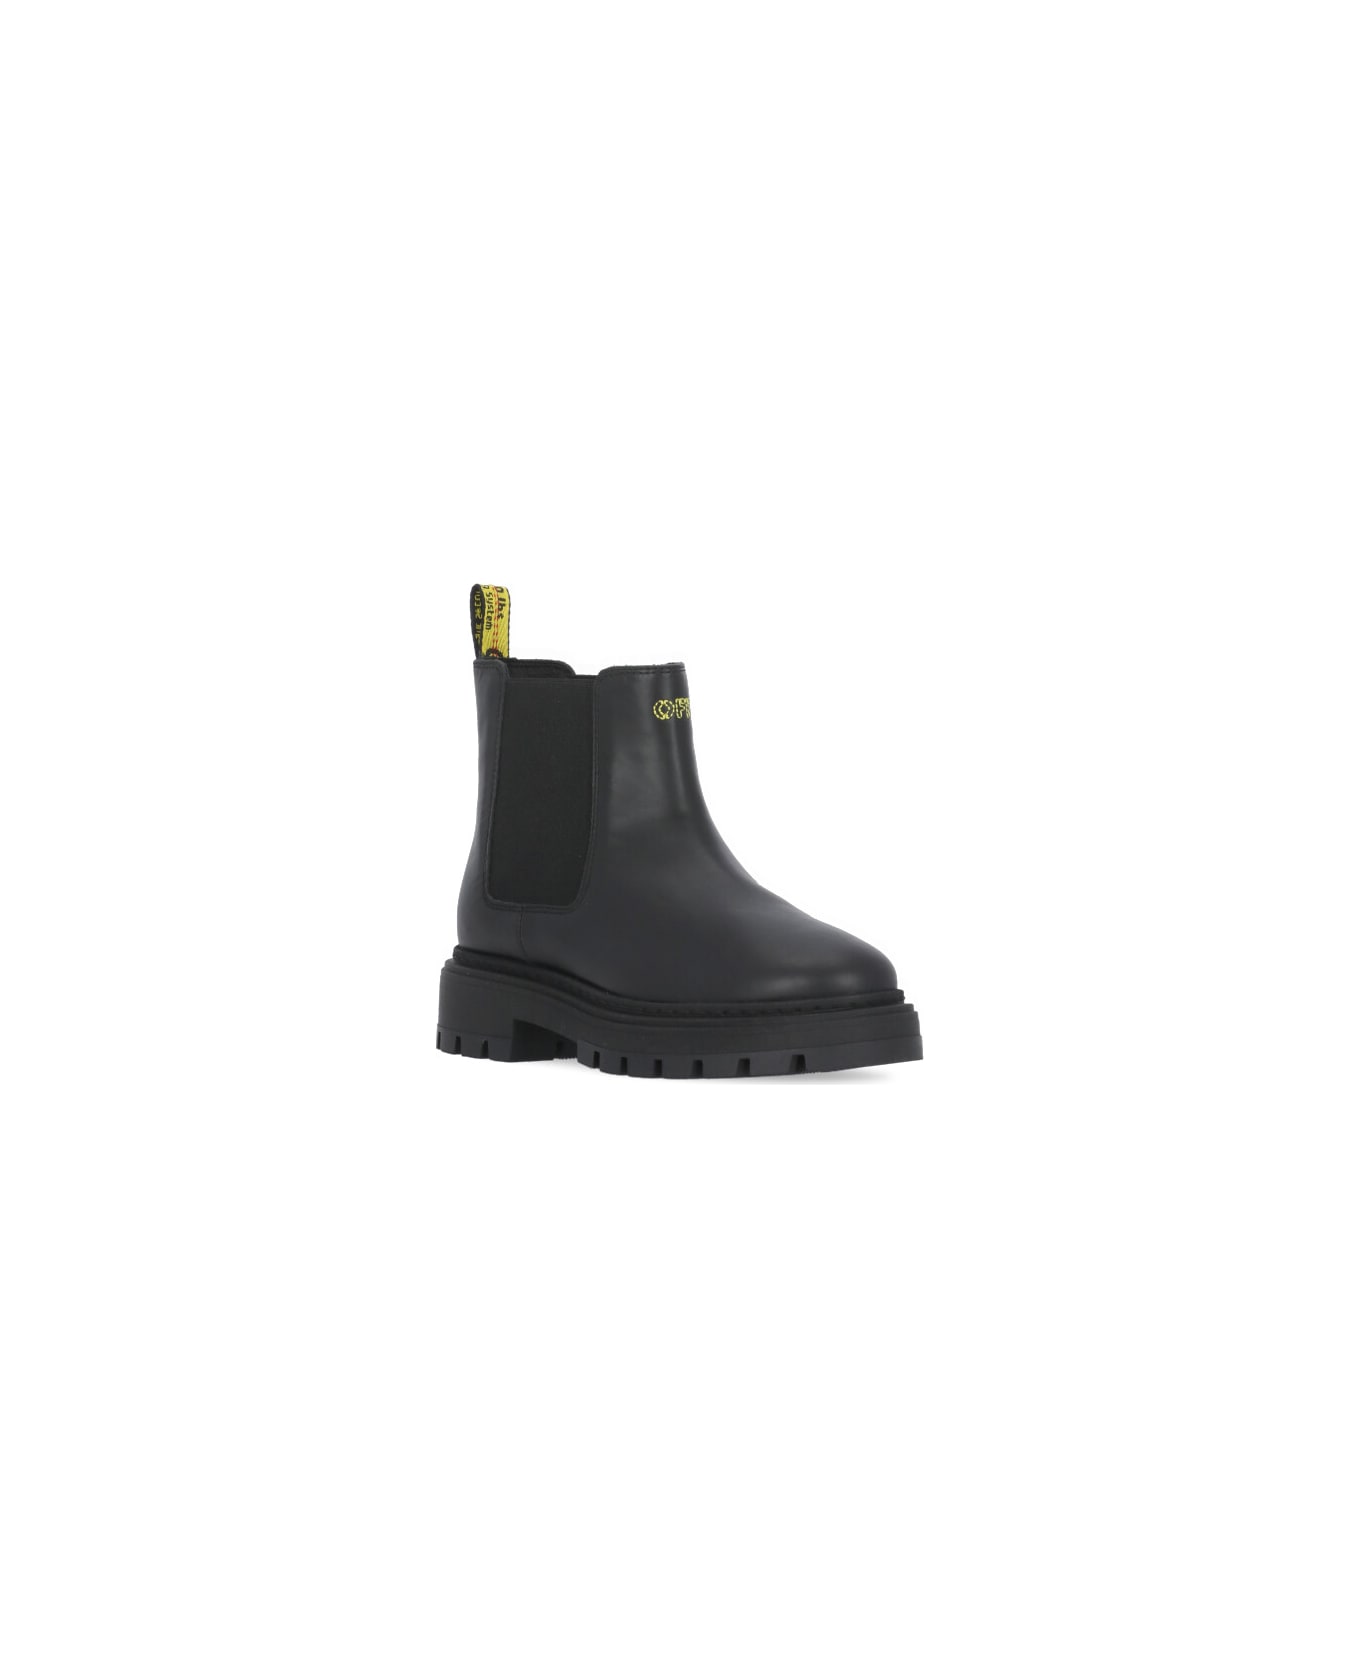 Off-White Chelsea Boots - Black